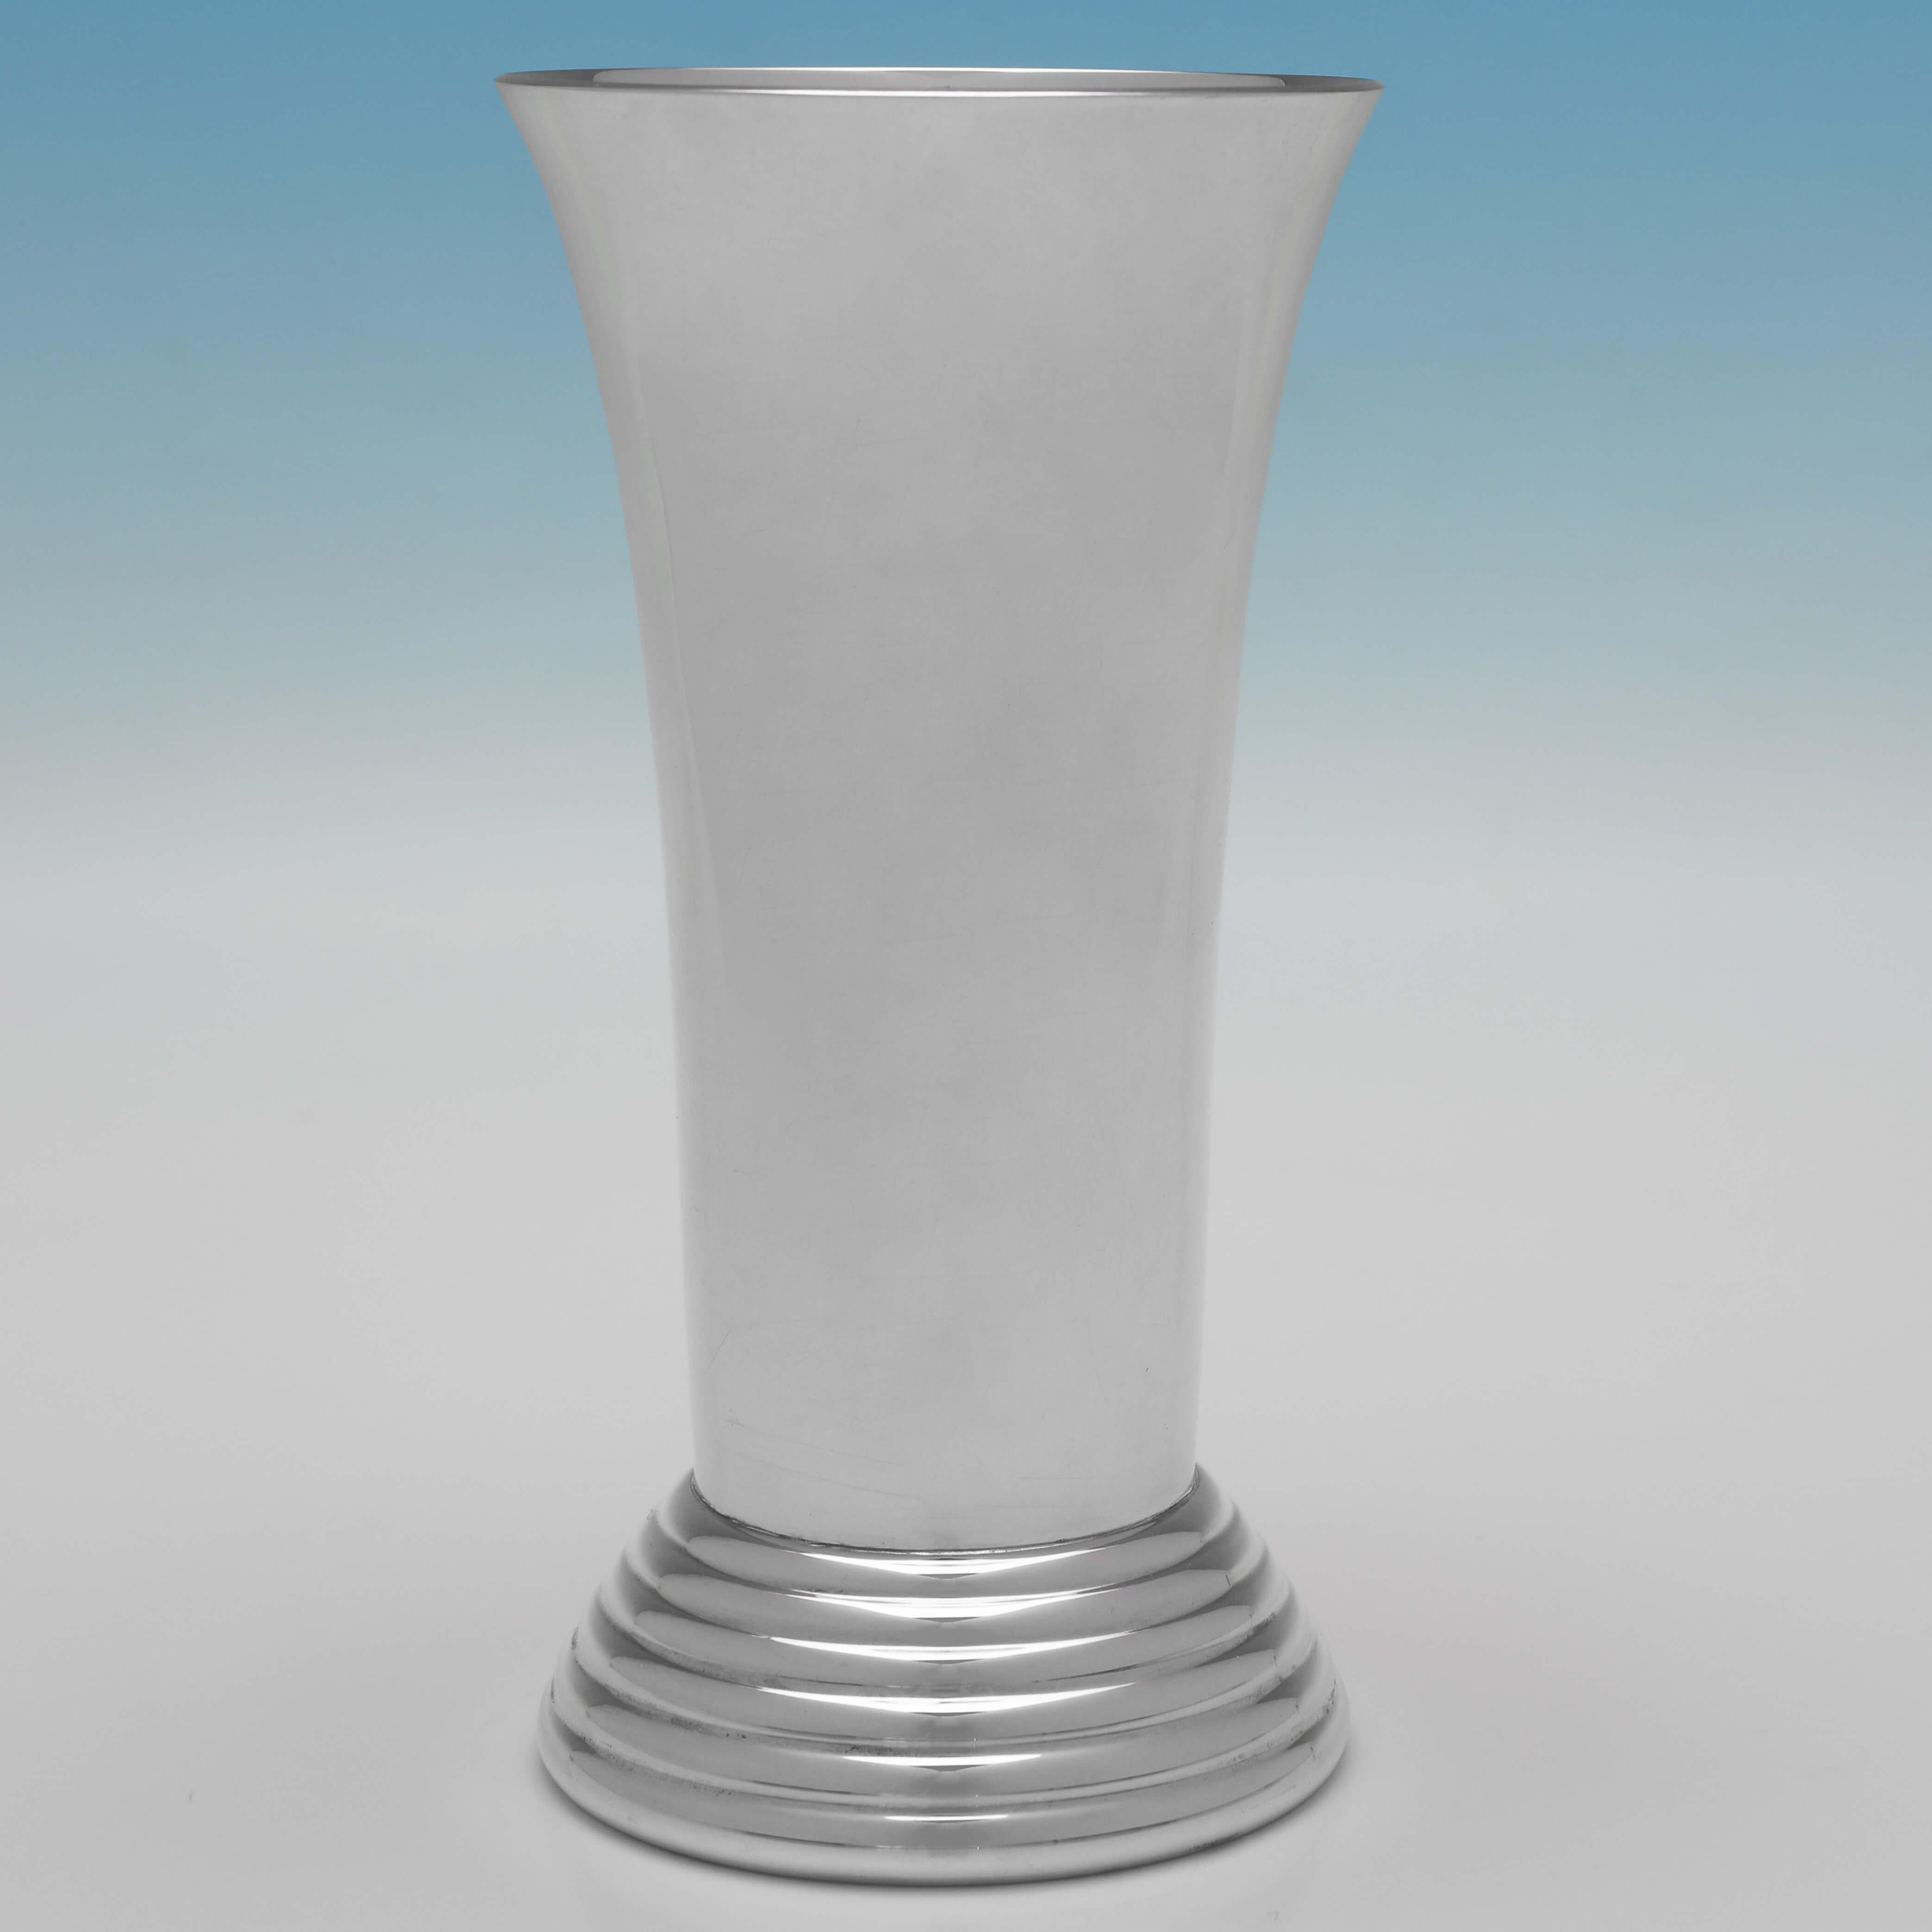 Hallmarked in London in 1997 by Gerrard & Co., this handsome, Sterling Silver Vase, is plain in design, and stands on a stepped base. 

The vase measures 6